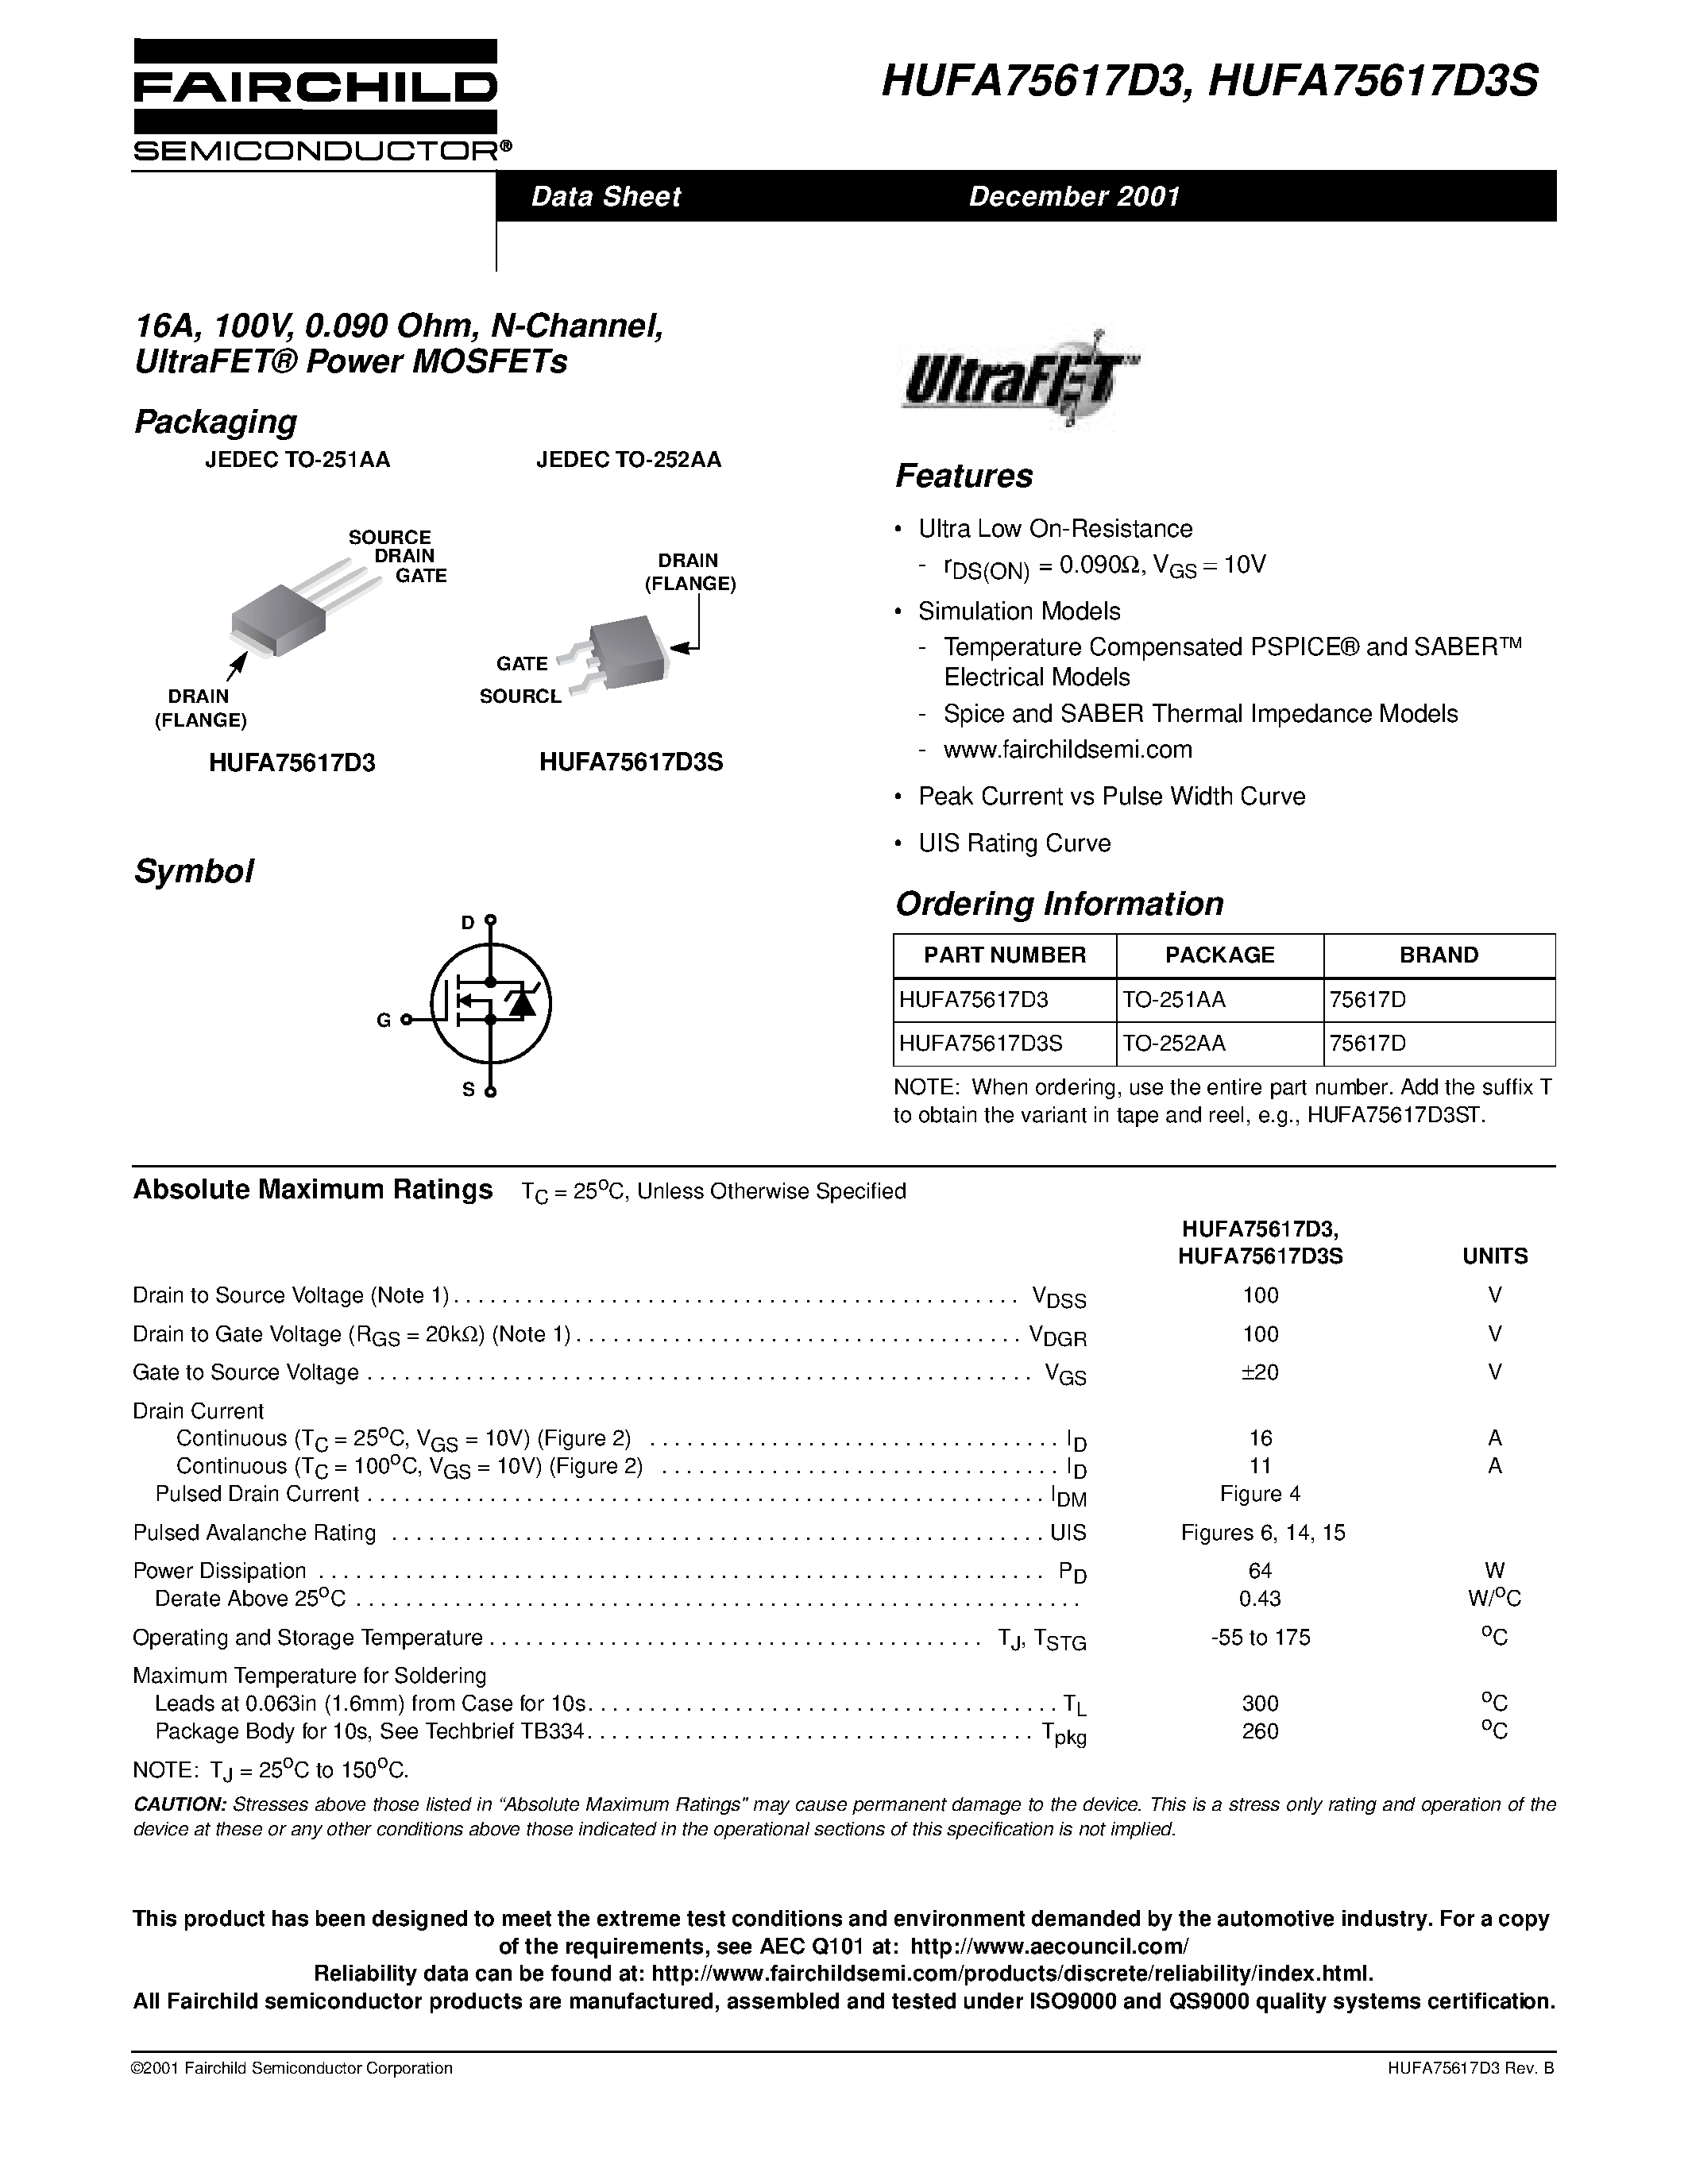 Datasheet HUFA75617D3S - 16A/ 100V/ 0.090 Ohm/ N-Channel/ UltraFET Power MOSFETs page 1